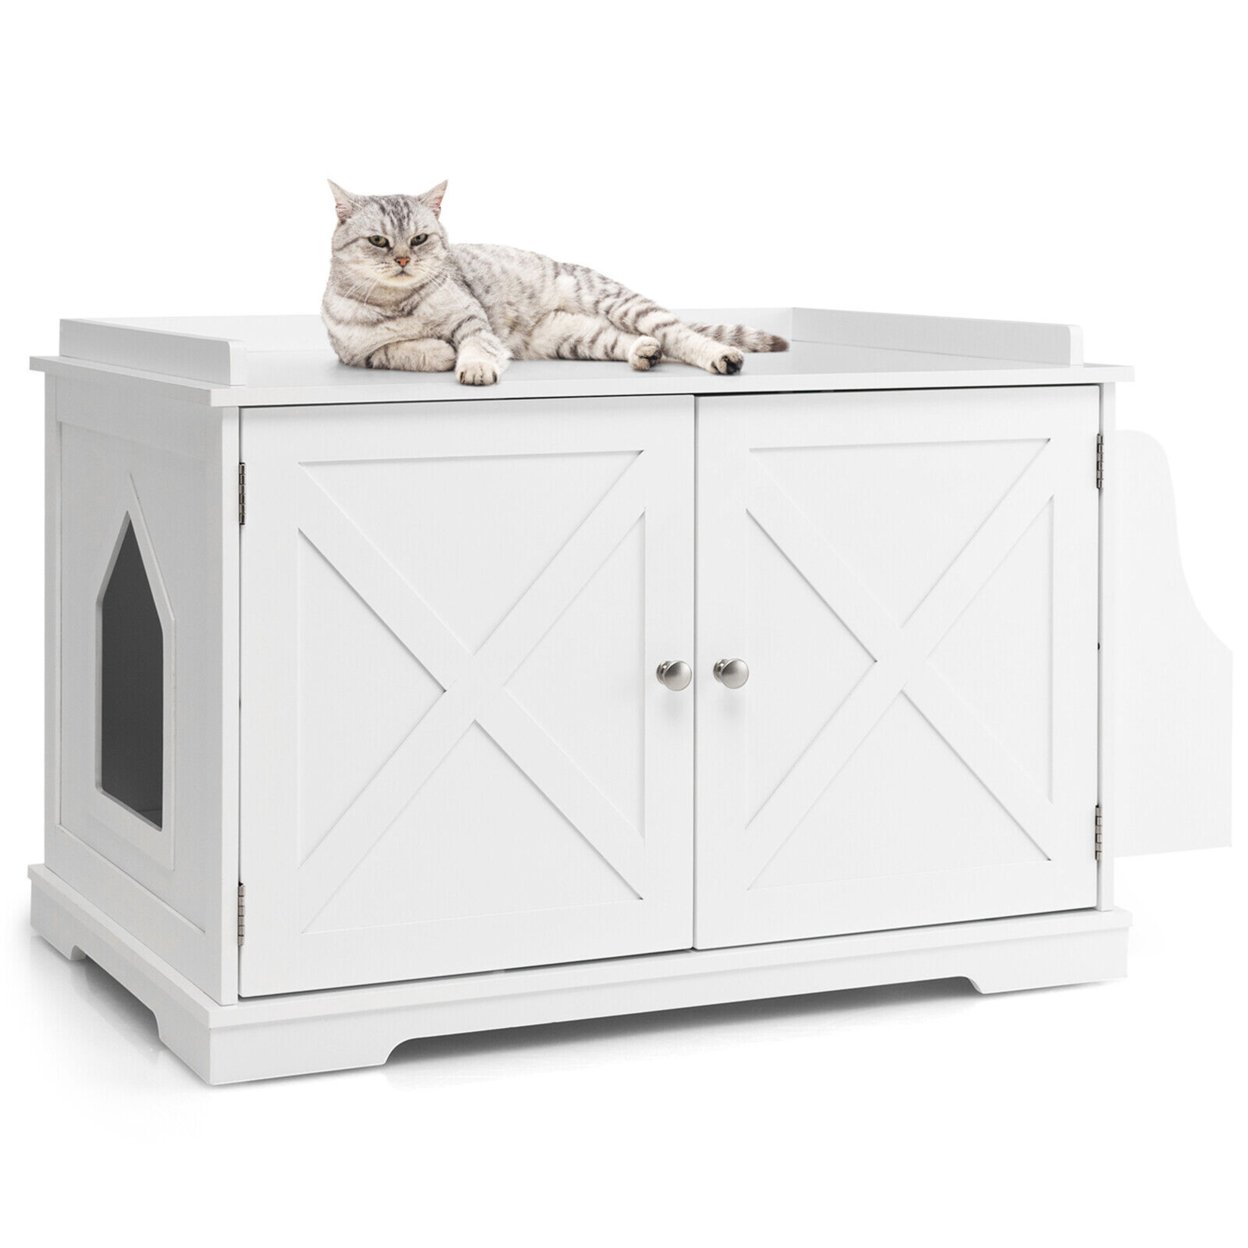 Large Side Table Furniture Wooden Cat Litter Box Enclosure Magazine Rack - Coffee